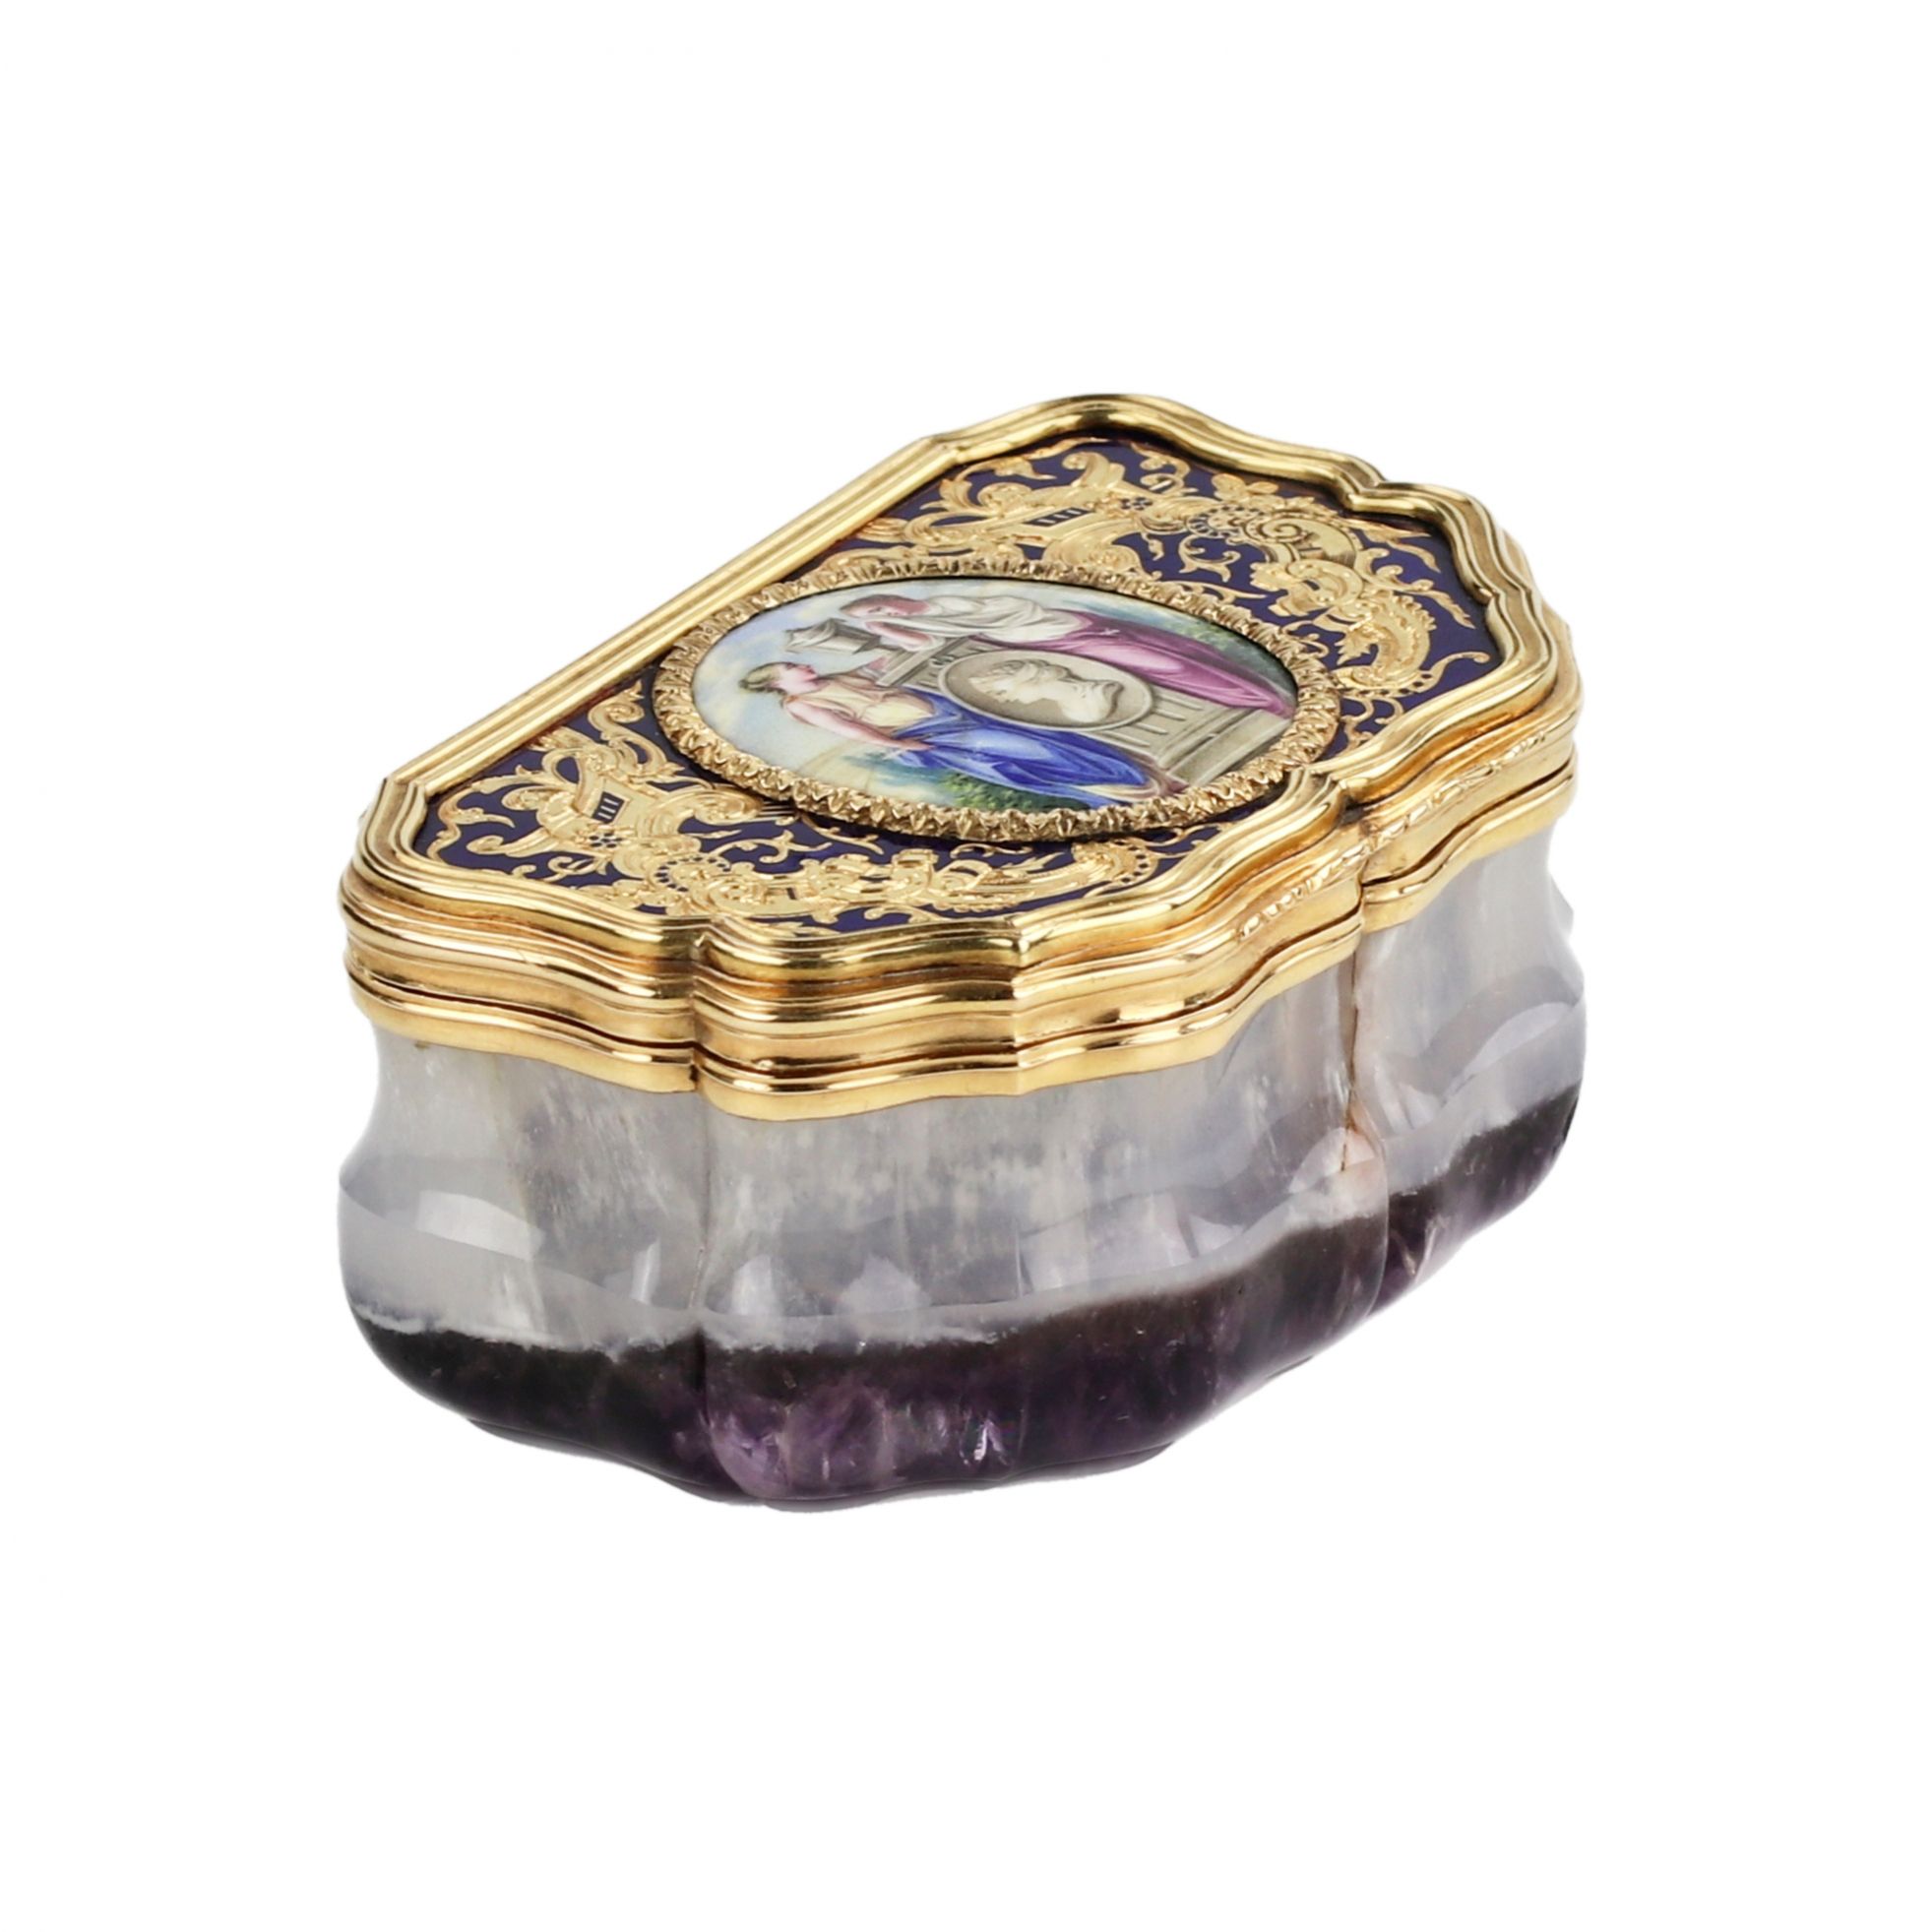 Unique-snuff-box-made-of-solid-amethyst-with-gold-I-Keibel-St-Petersburg-19th-century-